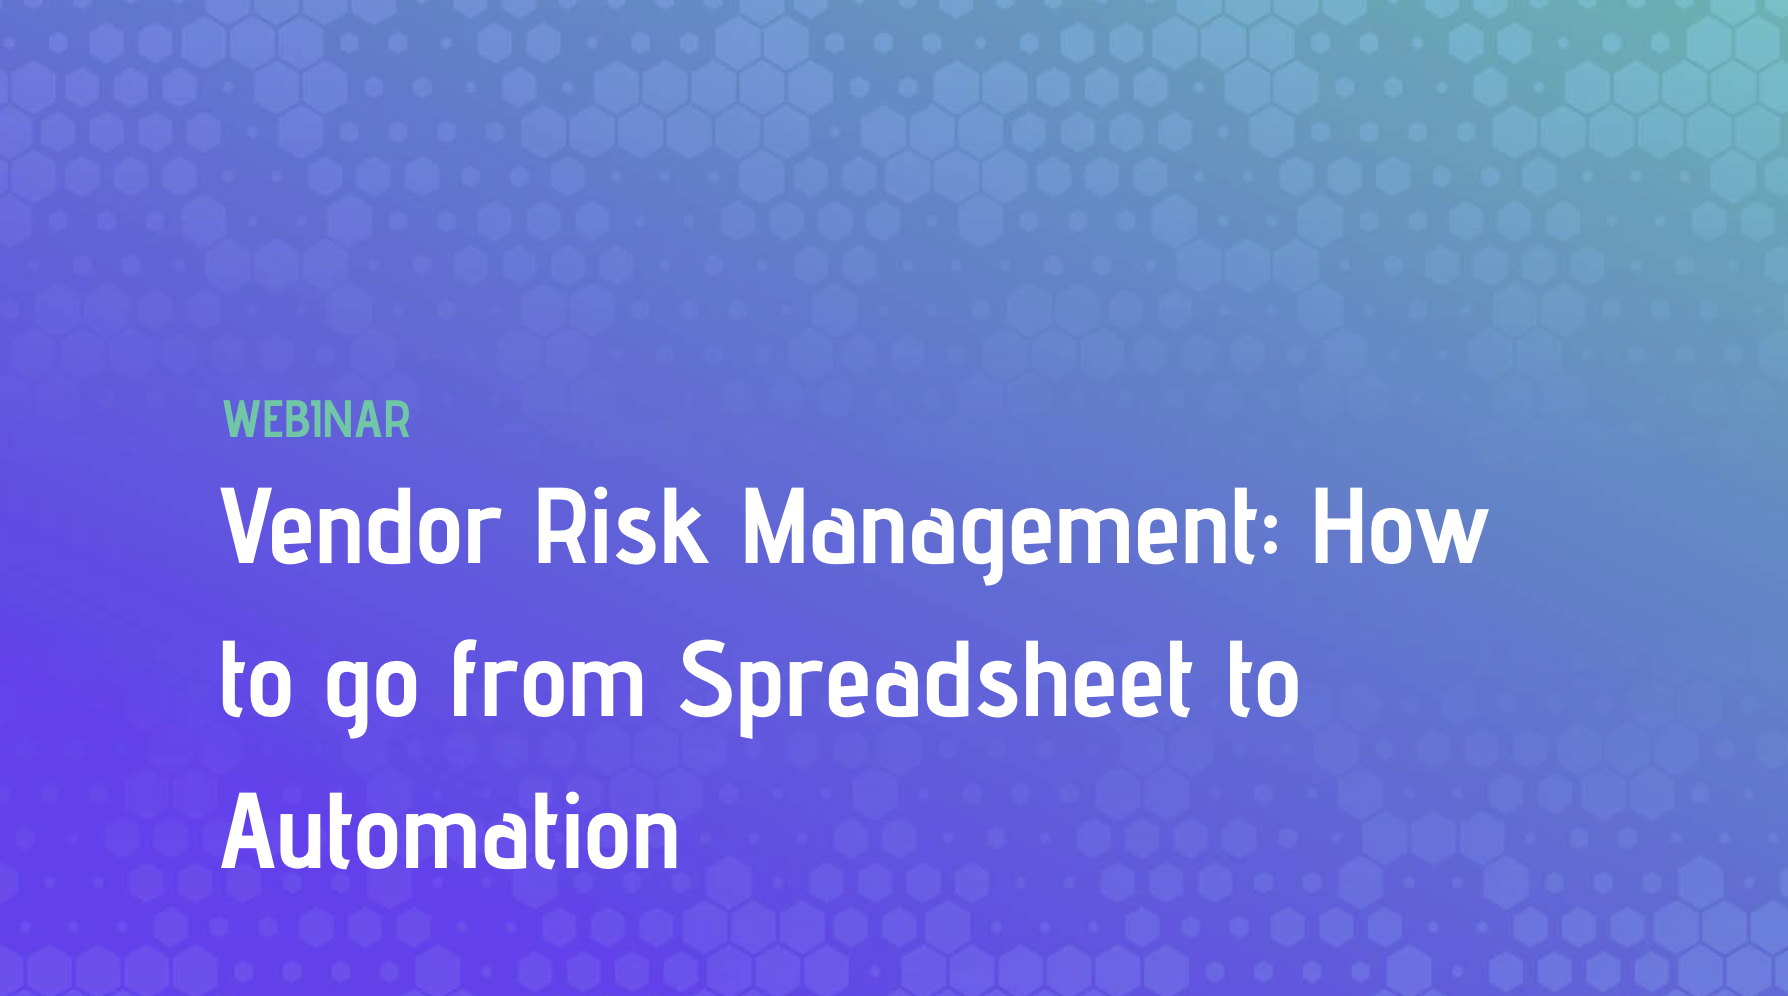 Vendor Risk Management: How to go from Spreadsheet to Automation